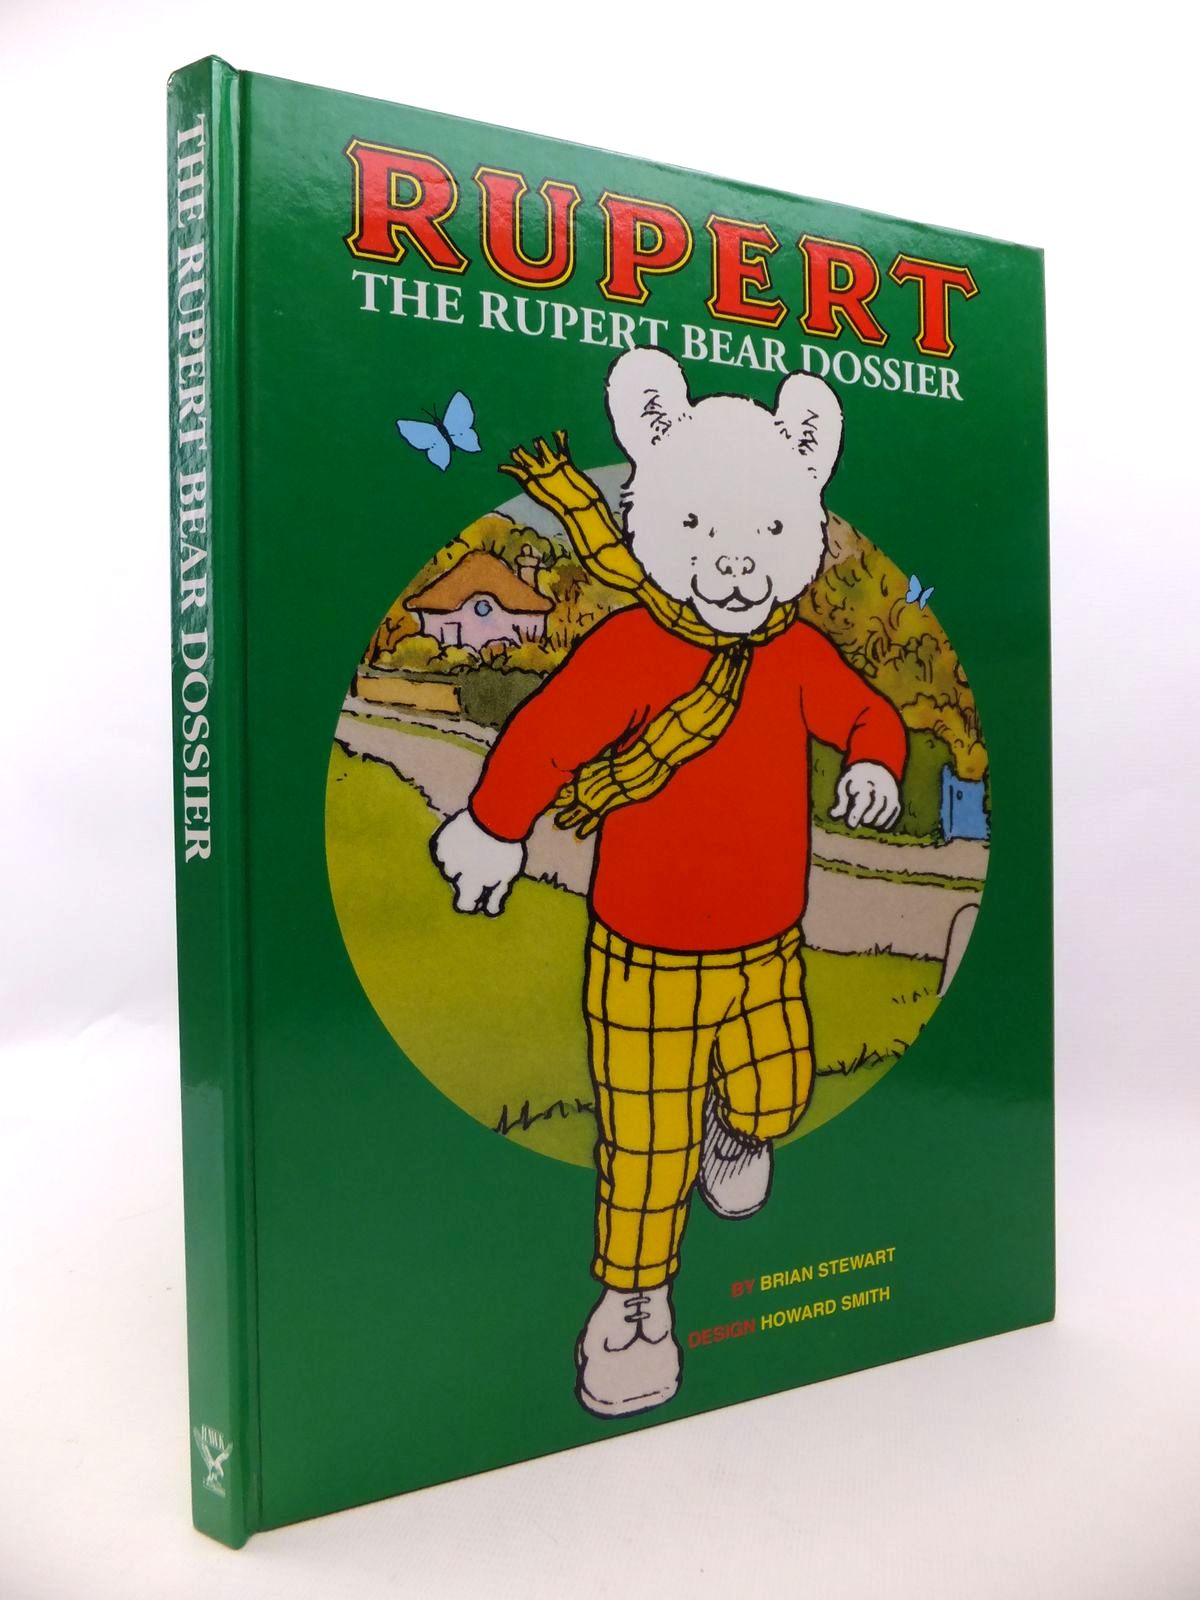 Buy Rupert Bear Print Original Vintage Rupert and the Glow-worms Delightful  Nursery Childrens Art Unique Gift Online in India - Etsy